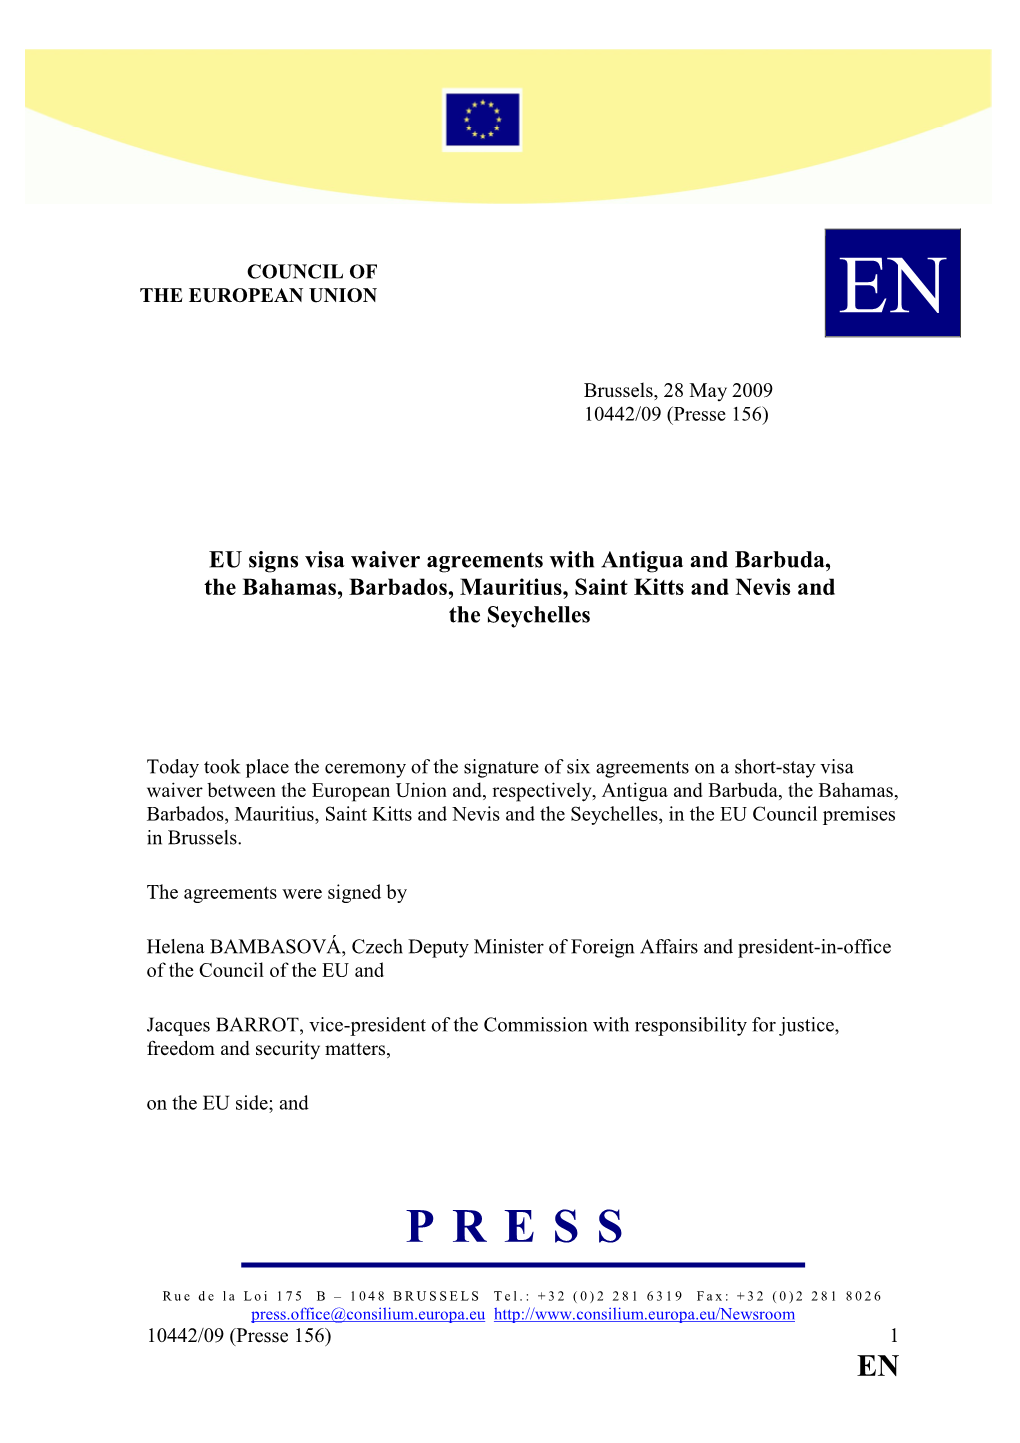 EU Signs Visa Waiver Agreements with Antigua and Barbuda, The